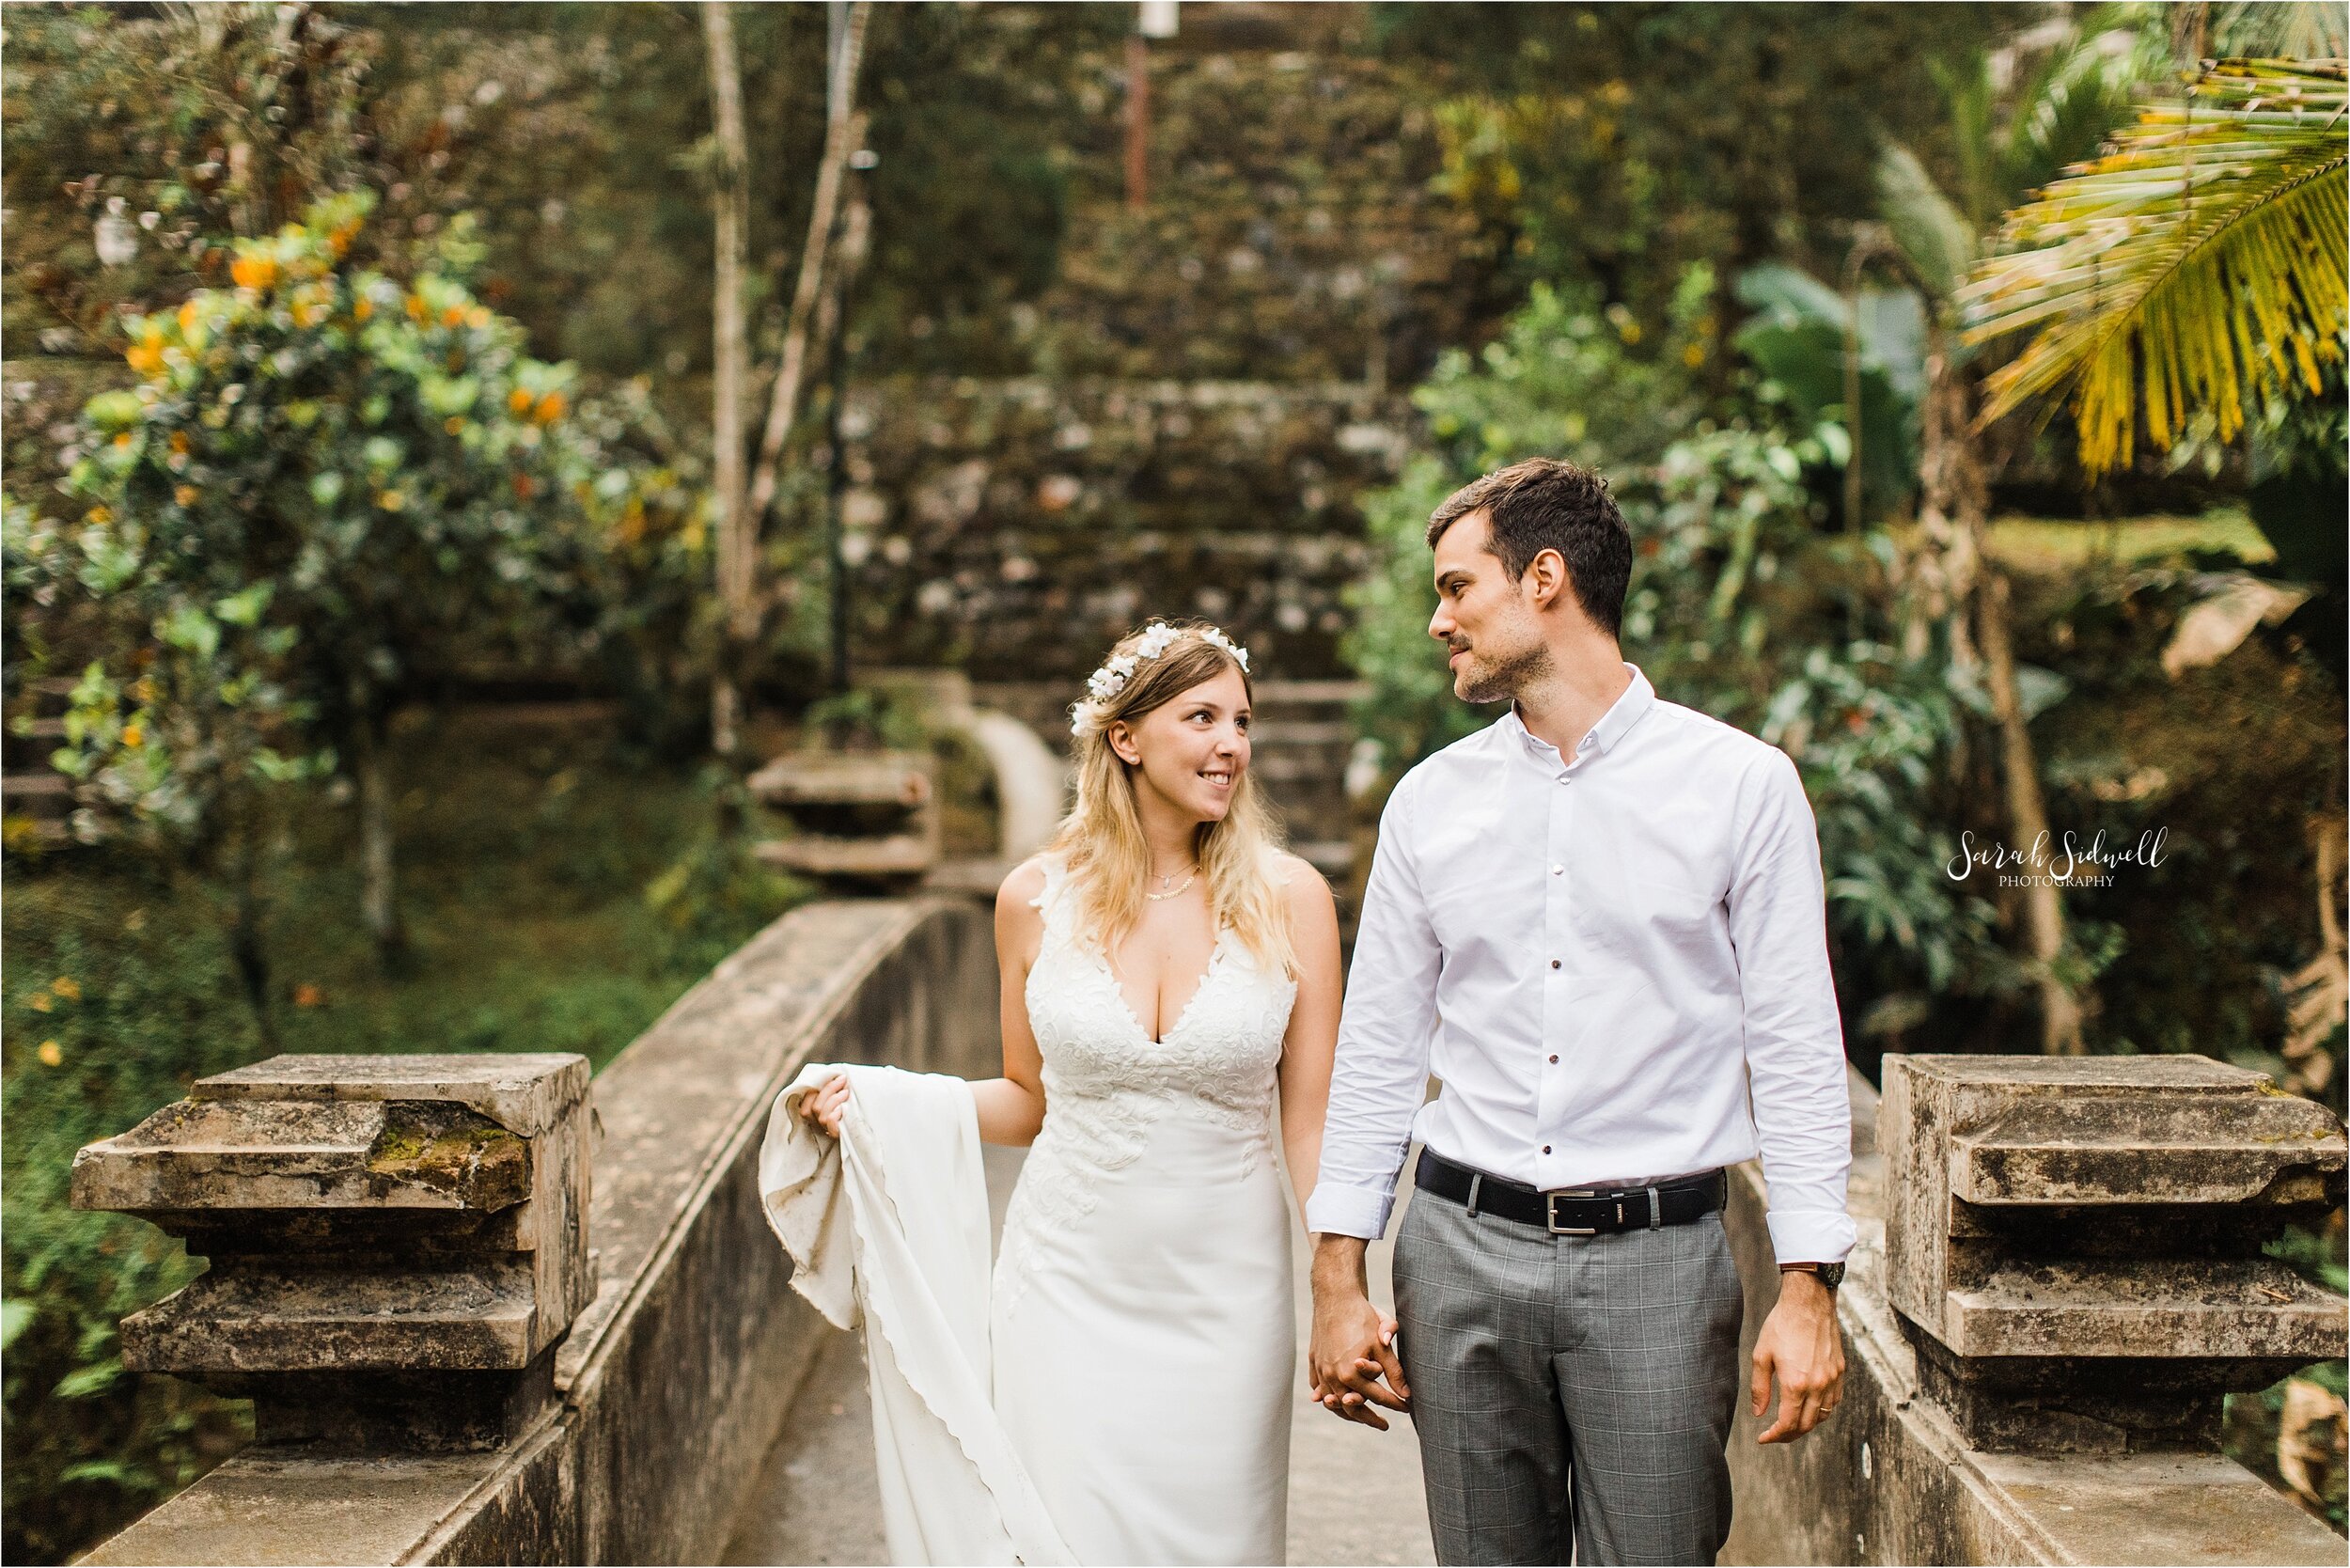 Day After Wedding Photo | Adventure Session in Bali